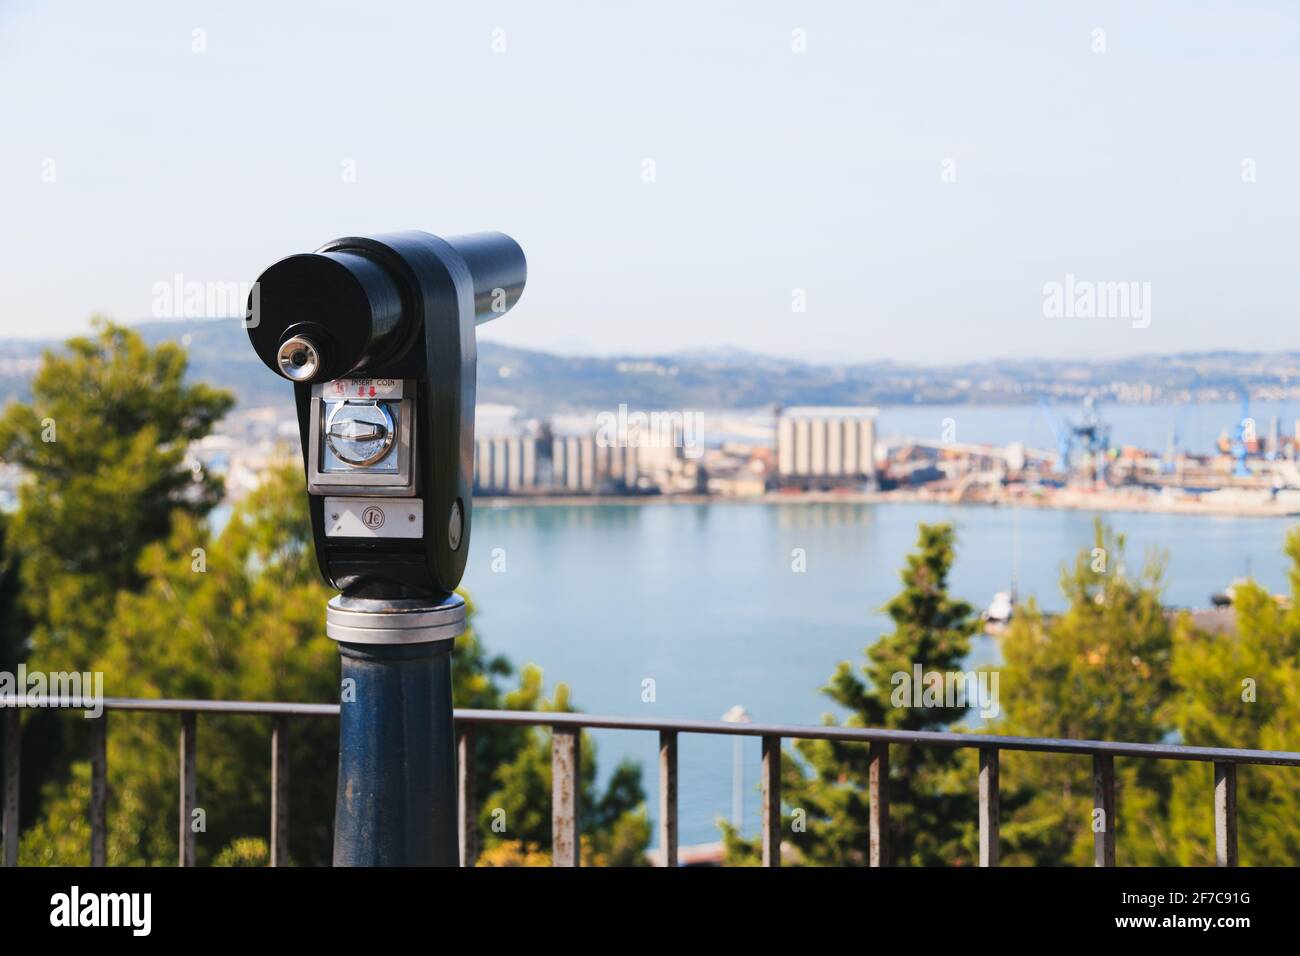 Sightseeing tourist coin operated telescope at watching point with scenic view at the port of Ancona, Italy Stock Photo